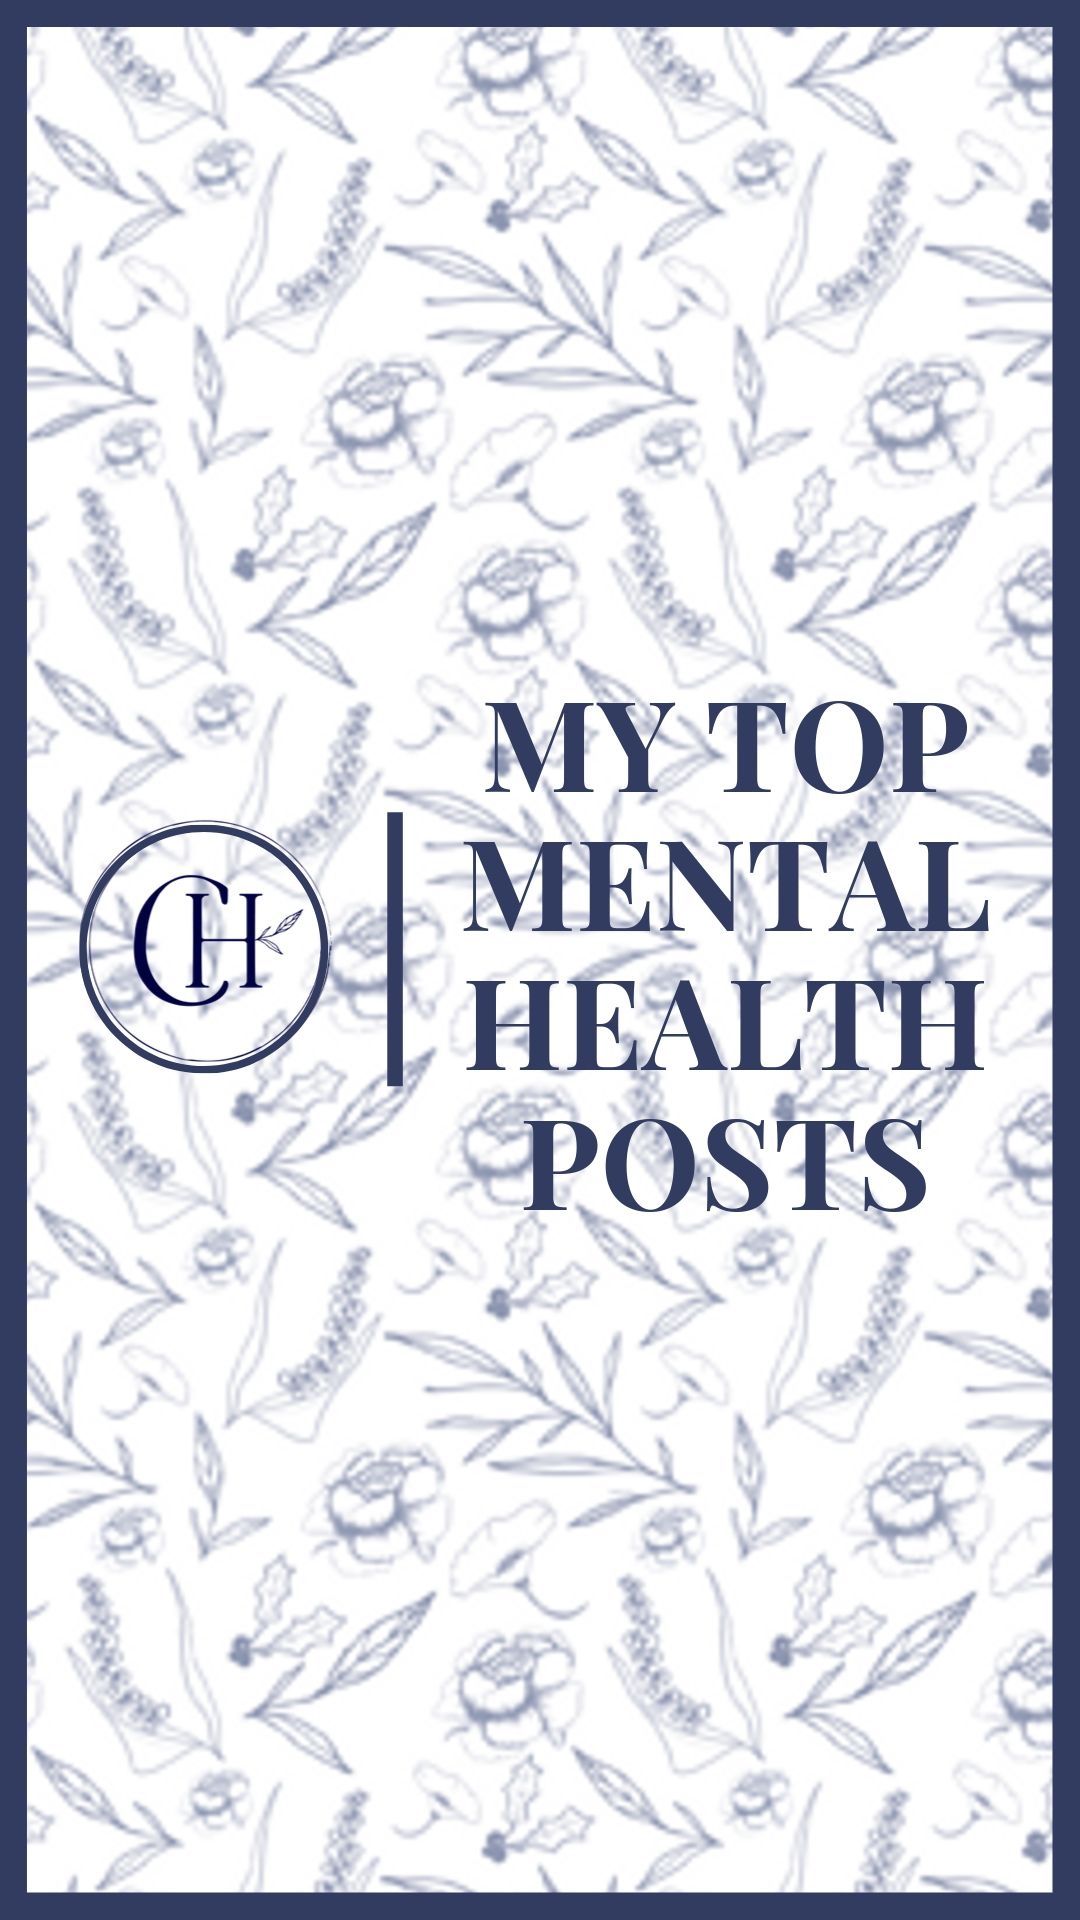 Top Mental Health Posts By Caitlin Houston about Anxiety, Depression, and Postpartum Depression 